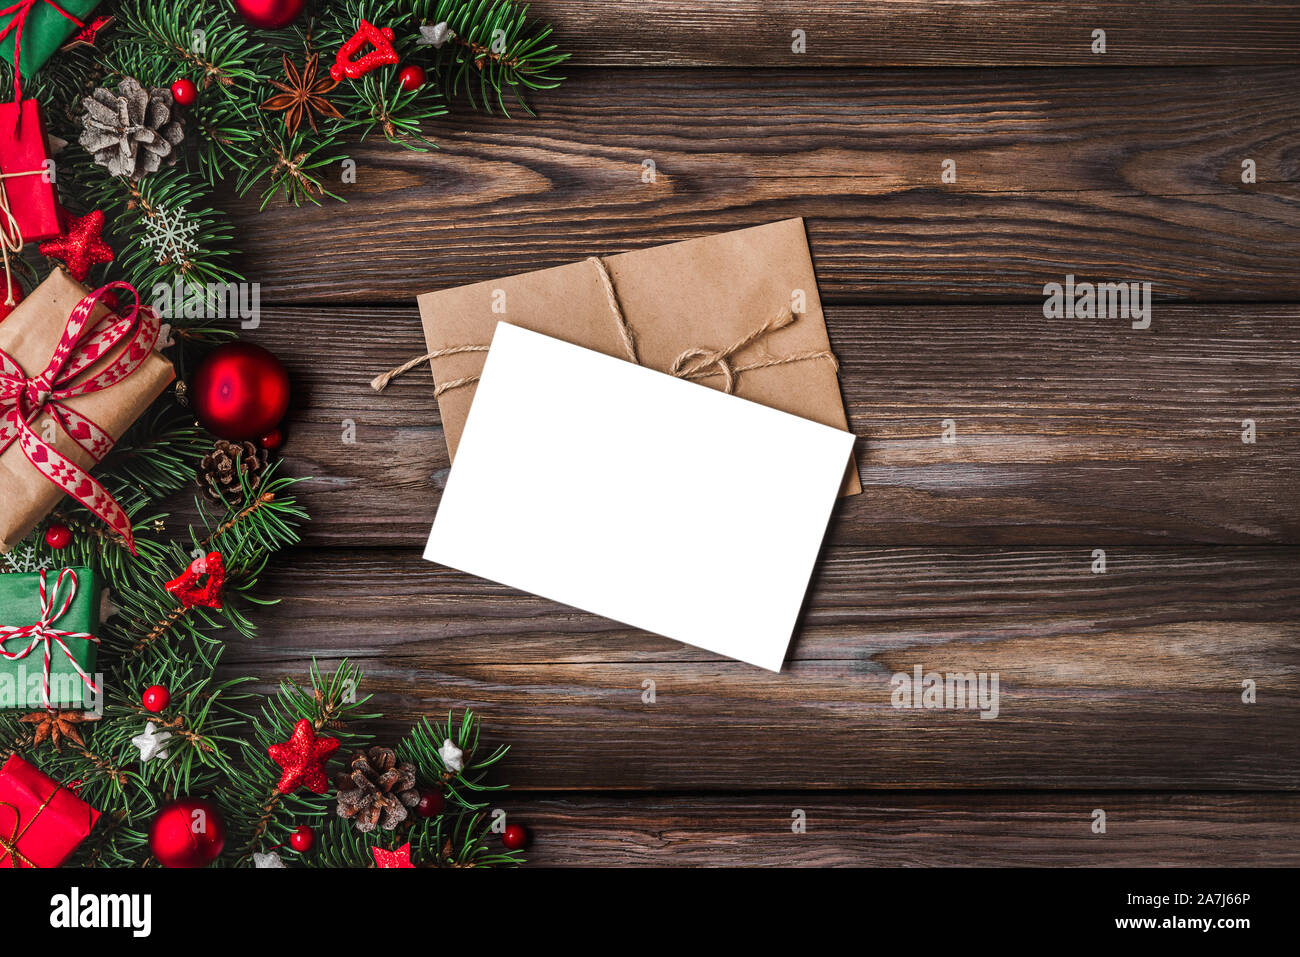 Christmas and Happy New Year greeting card with fir tree branches, gift boxes, red holiday decorations on rustic wooden table. mock up. top view with Stock Photo